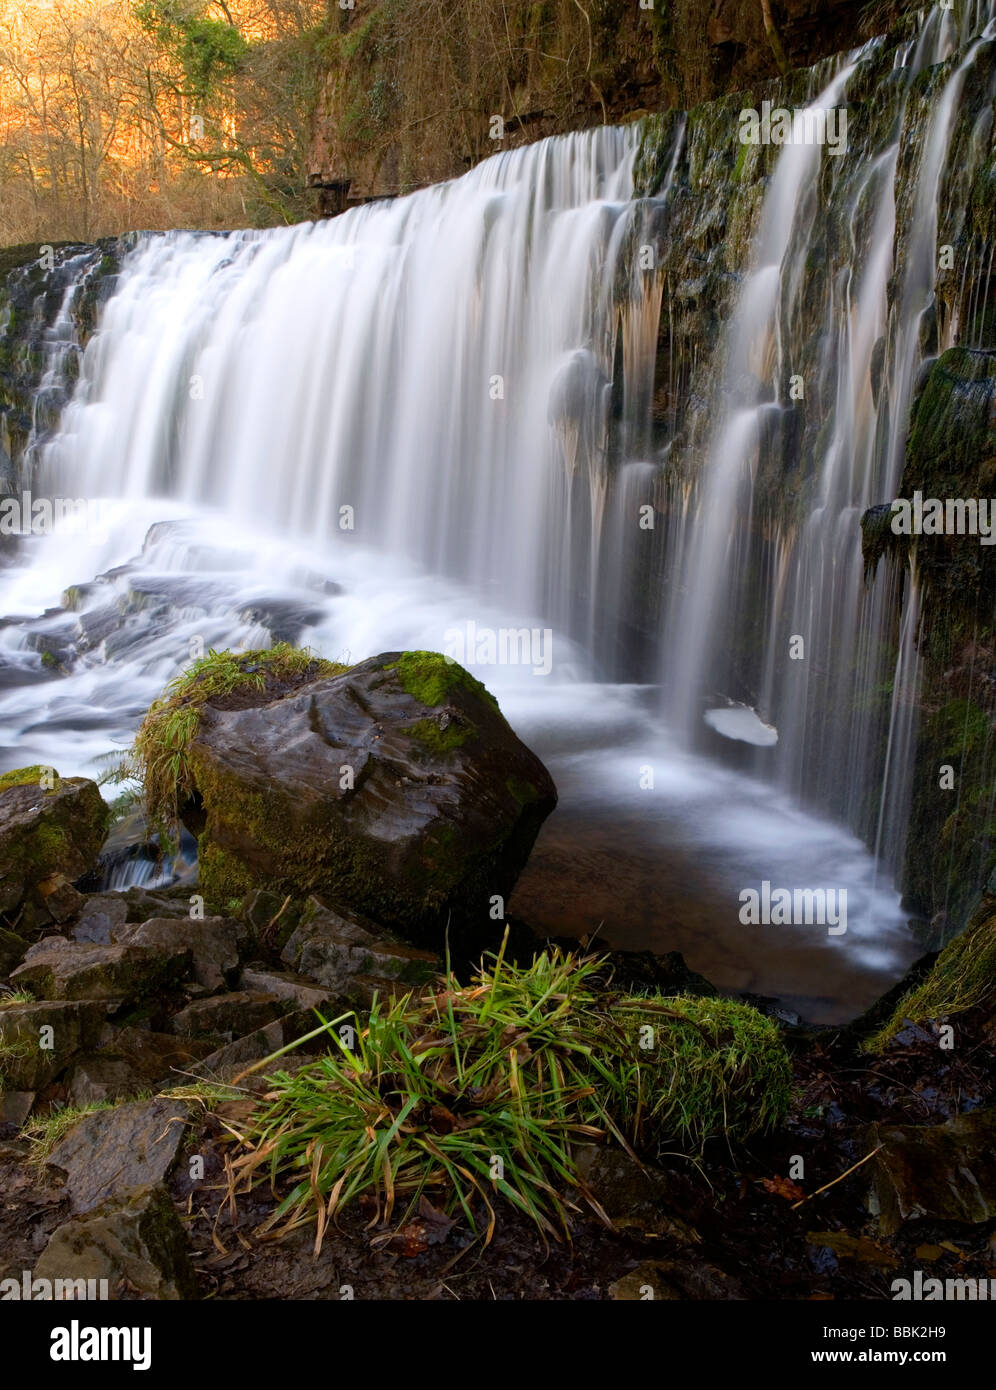 Waterfall Isaf Clun Gwyn near Pontneddfechan in the brecon beacons national park, Wales Stock Photo